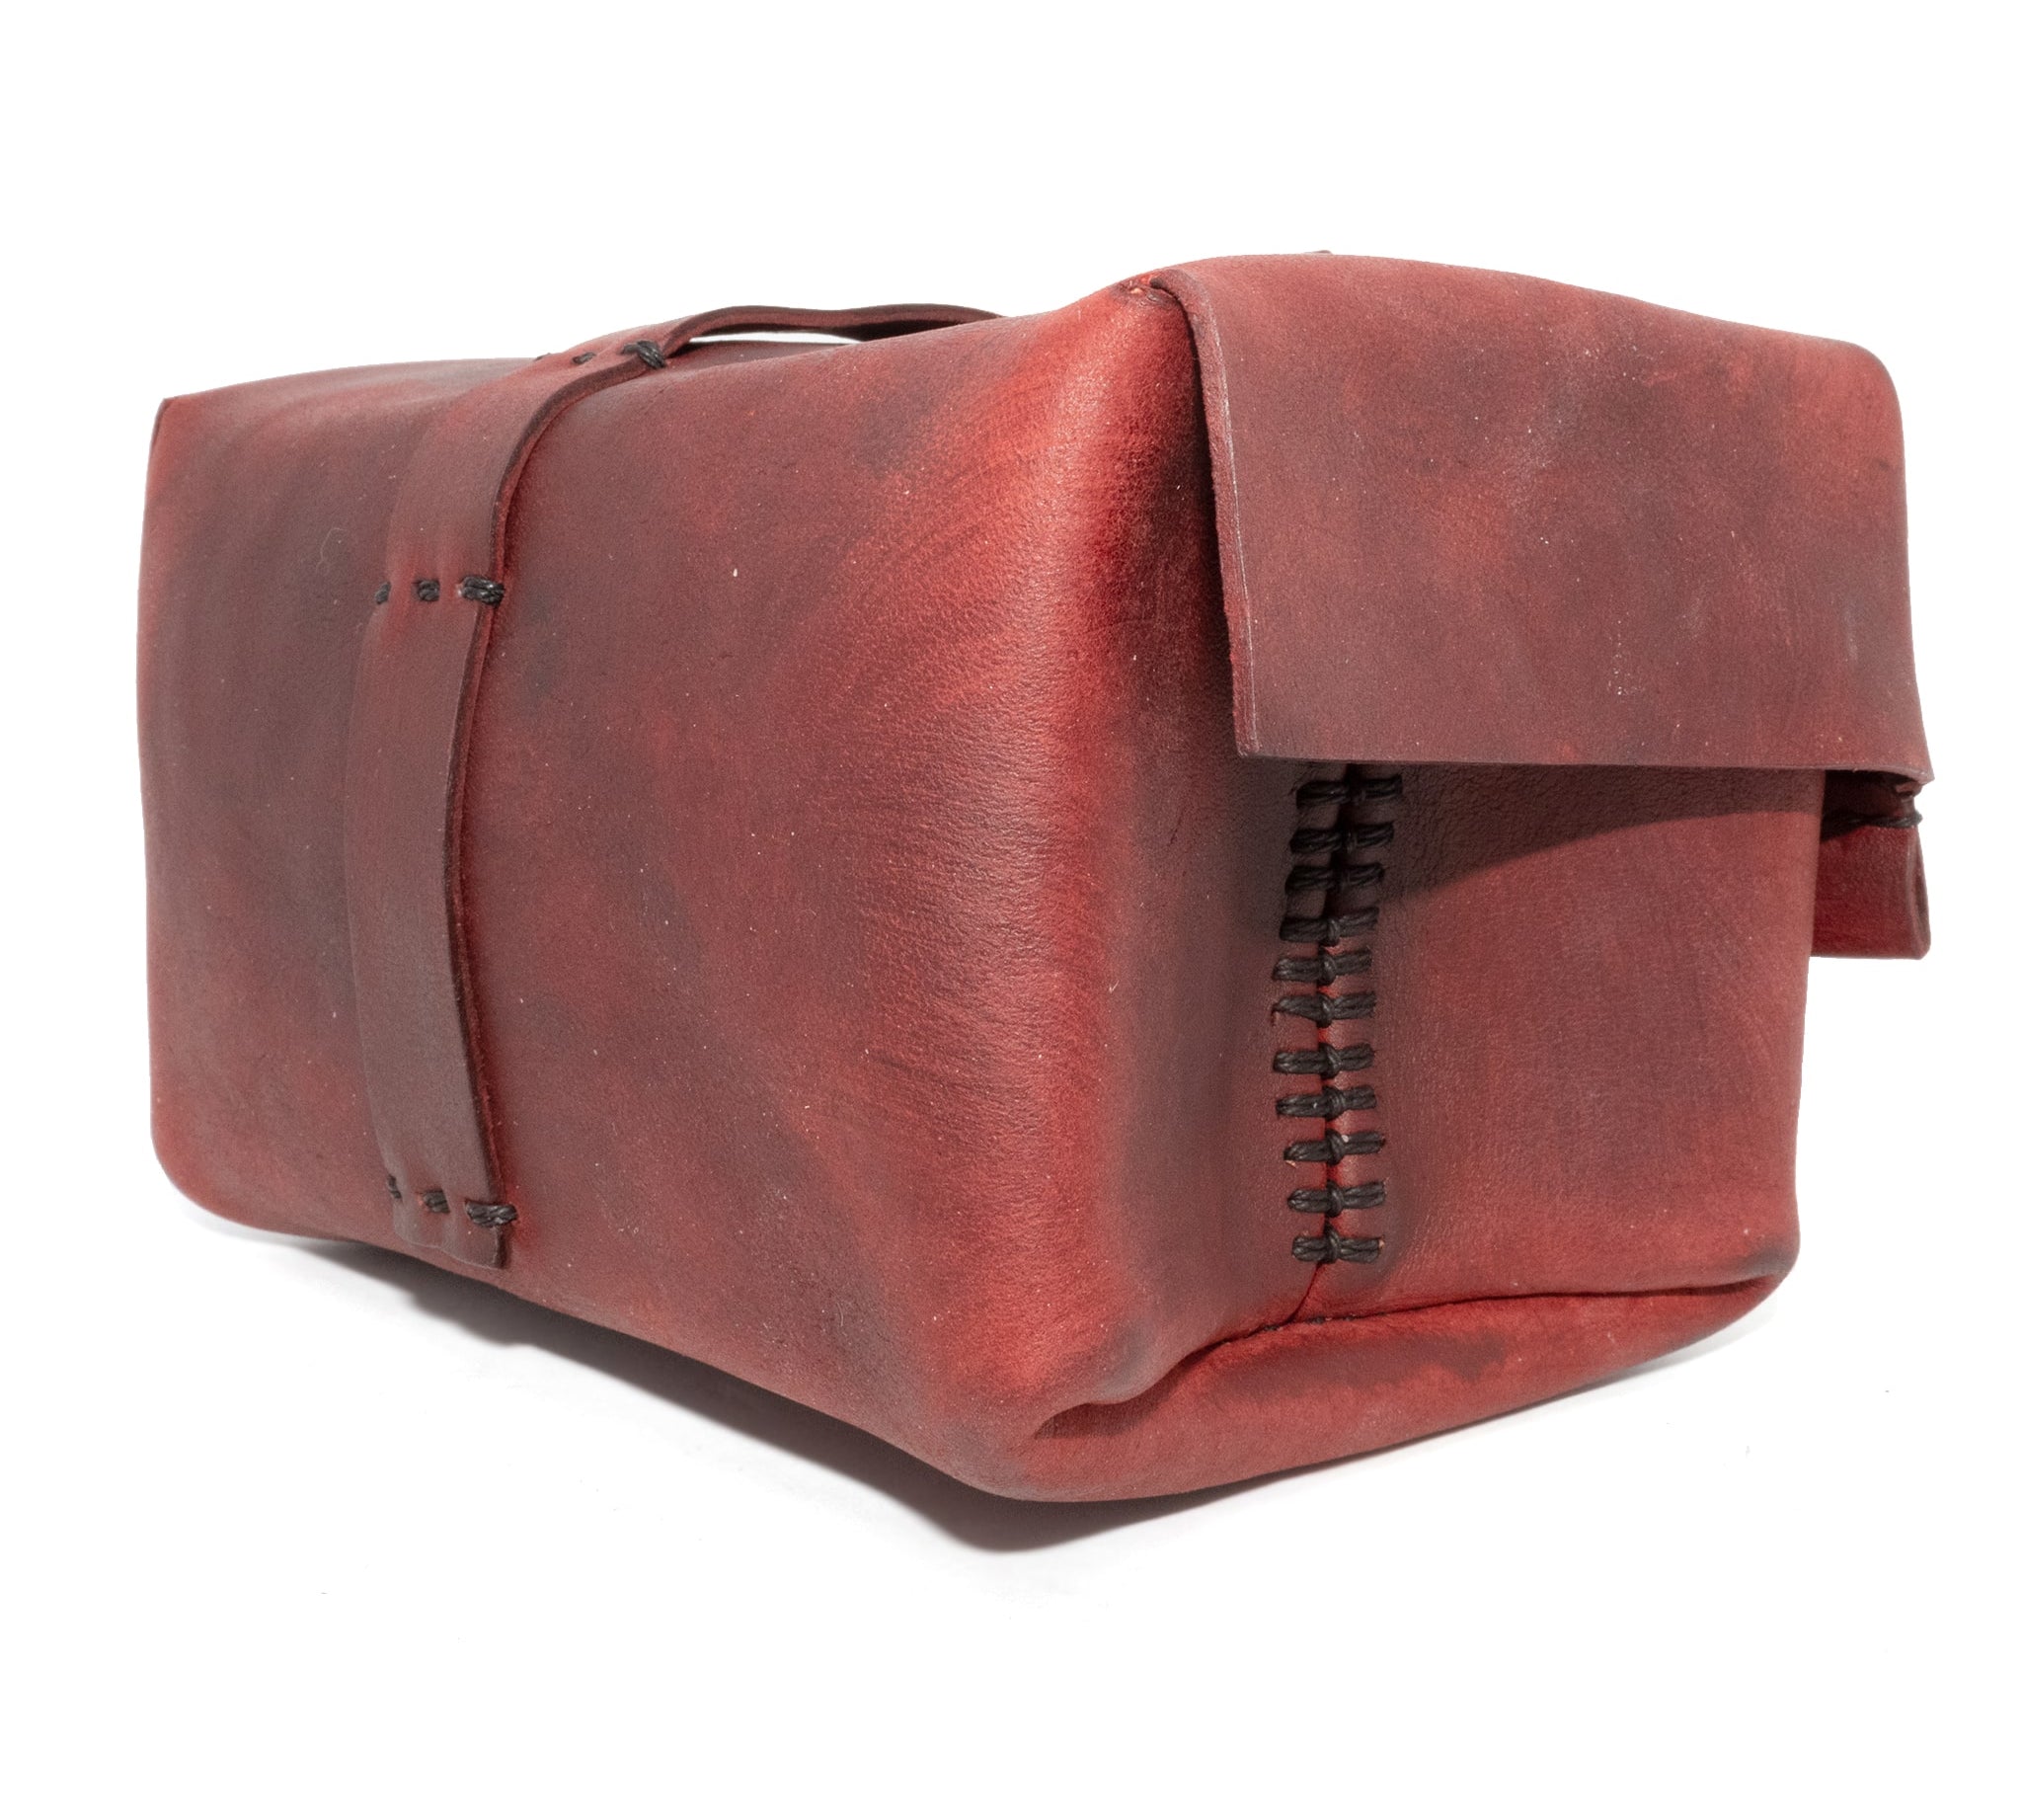 horse culatta hand dyed red leather vanity case from atelier skn.